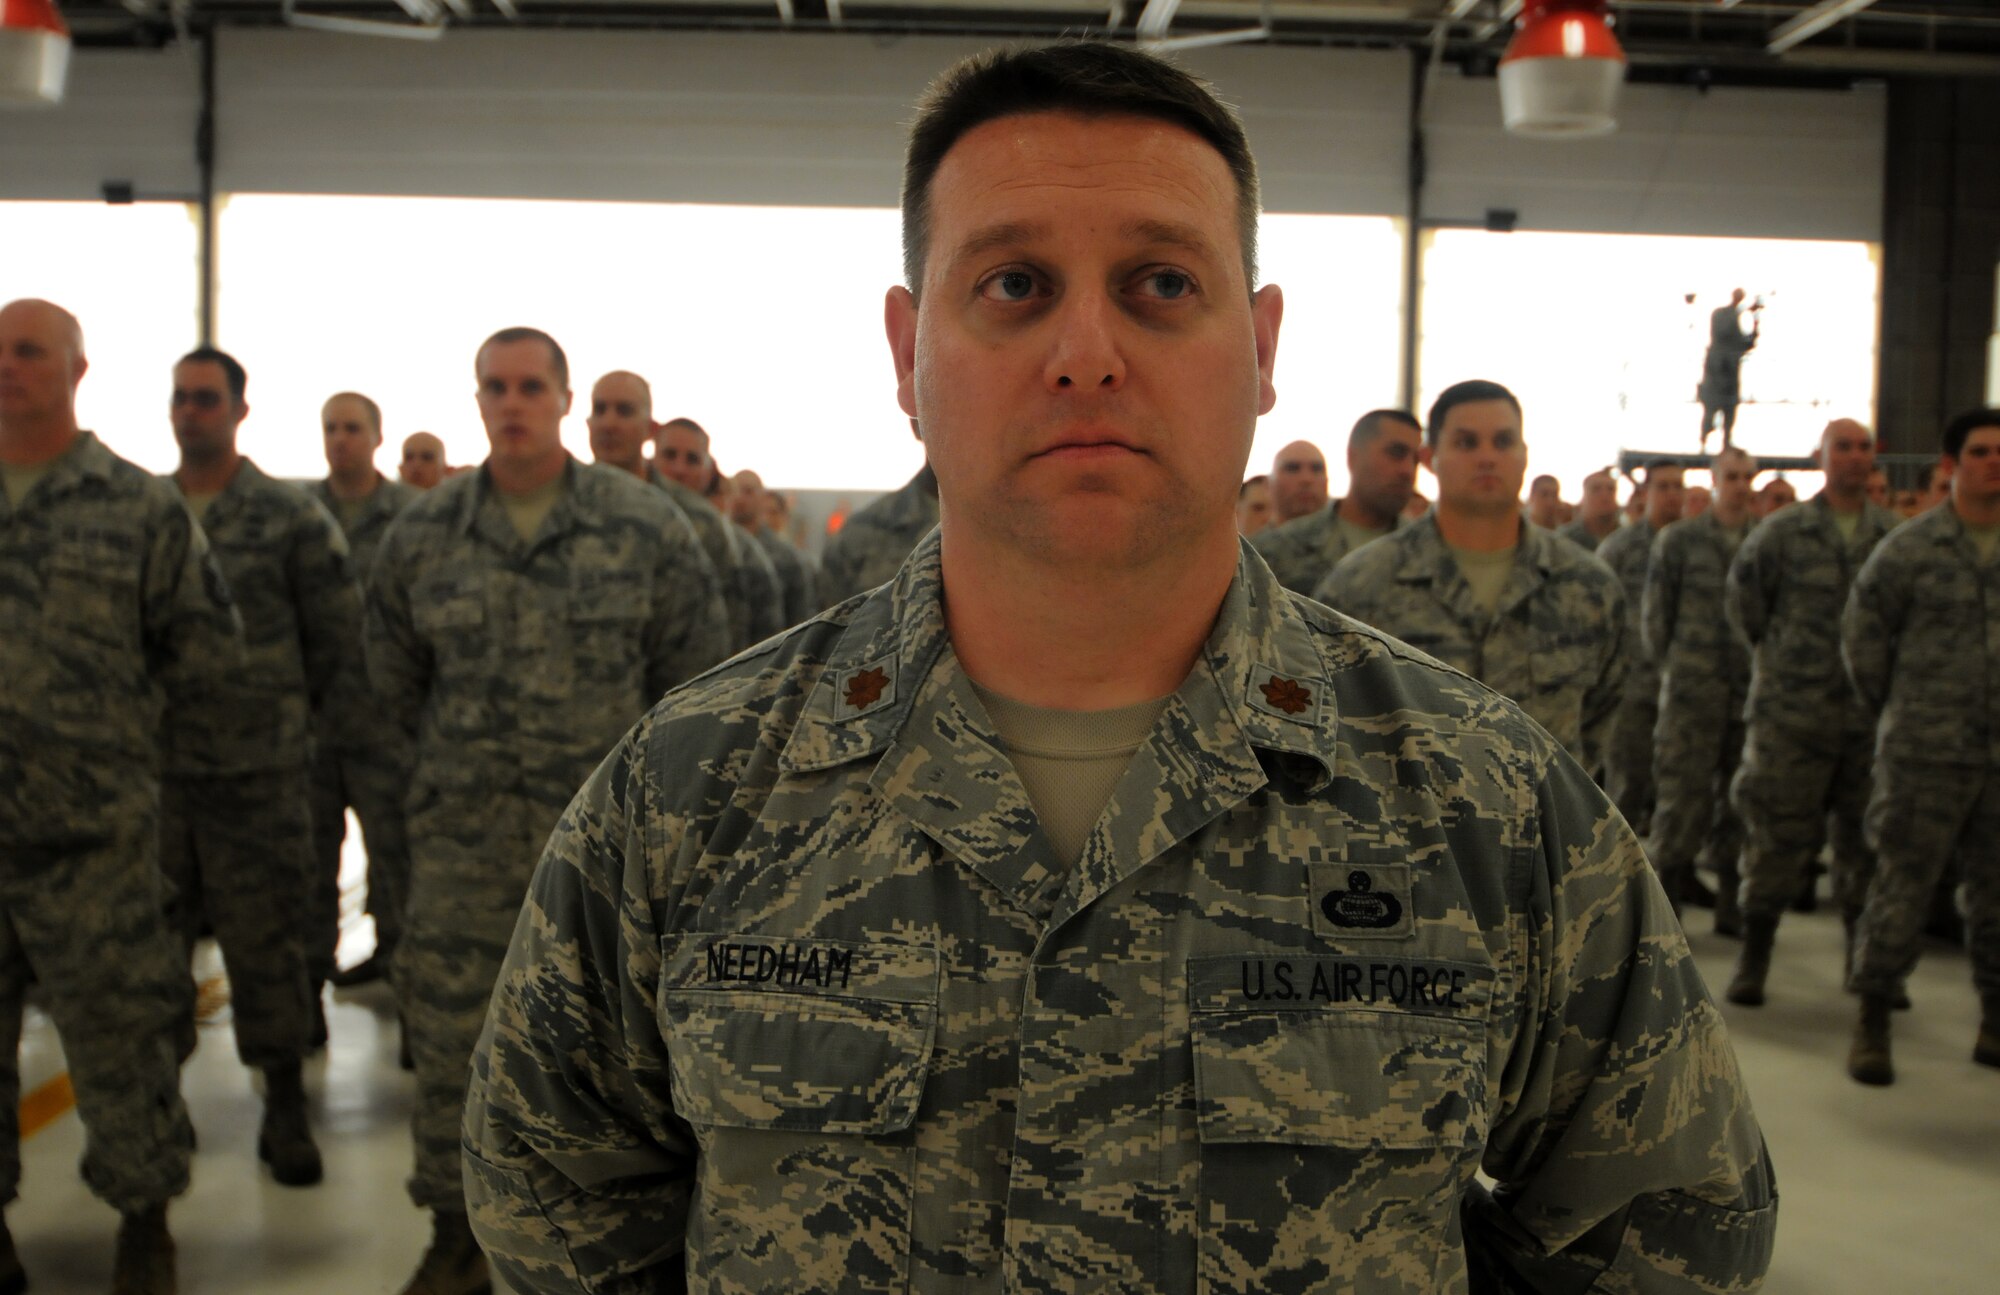 Maj. Paul Needham stands in front of the 288th Operations Support Squadron during a Conversion Day ceremony held at Ebbing Air National Guard Base, Fort Smith, Arkansas, June 7, 2014. Needham took command of the newly activated 288th OSS during the ceremony. The 188th Fighter Wing was redesignated as the 188th Wing during the event. The ceremony also recognized the many changes occurring at the wing as a result of its conversion to a remotely piloted aircraft (MQ-9 Reapers) and intelligence, surveillance and reconnaissance mission. (U.S. Air National Guard photo by Staff Sgt. Matthew Pelkey) 